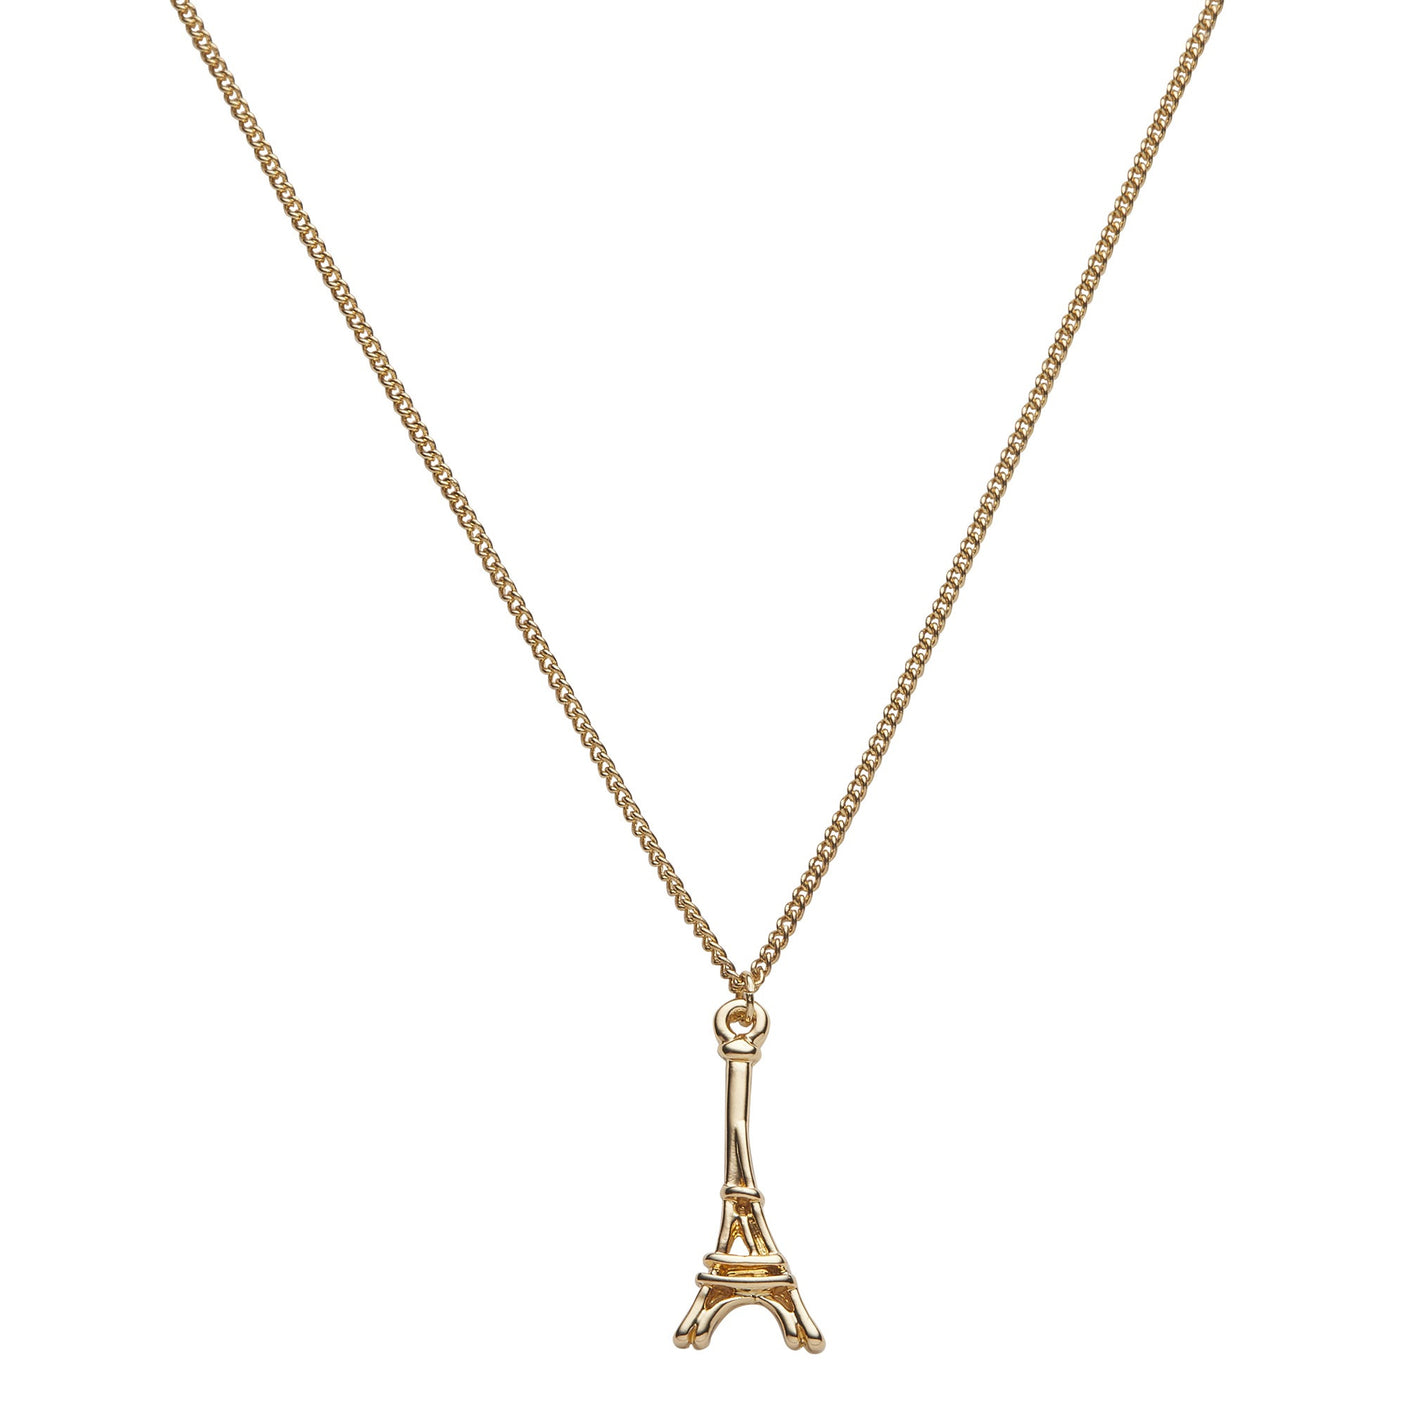 Pastel Chic Eiffel Tower Necklace